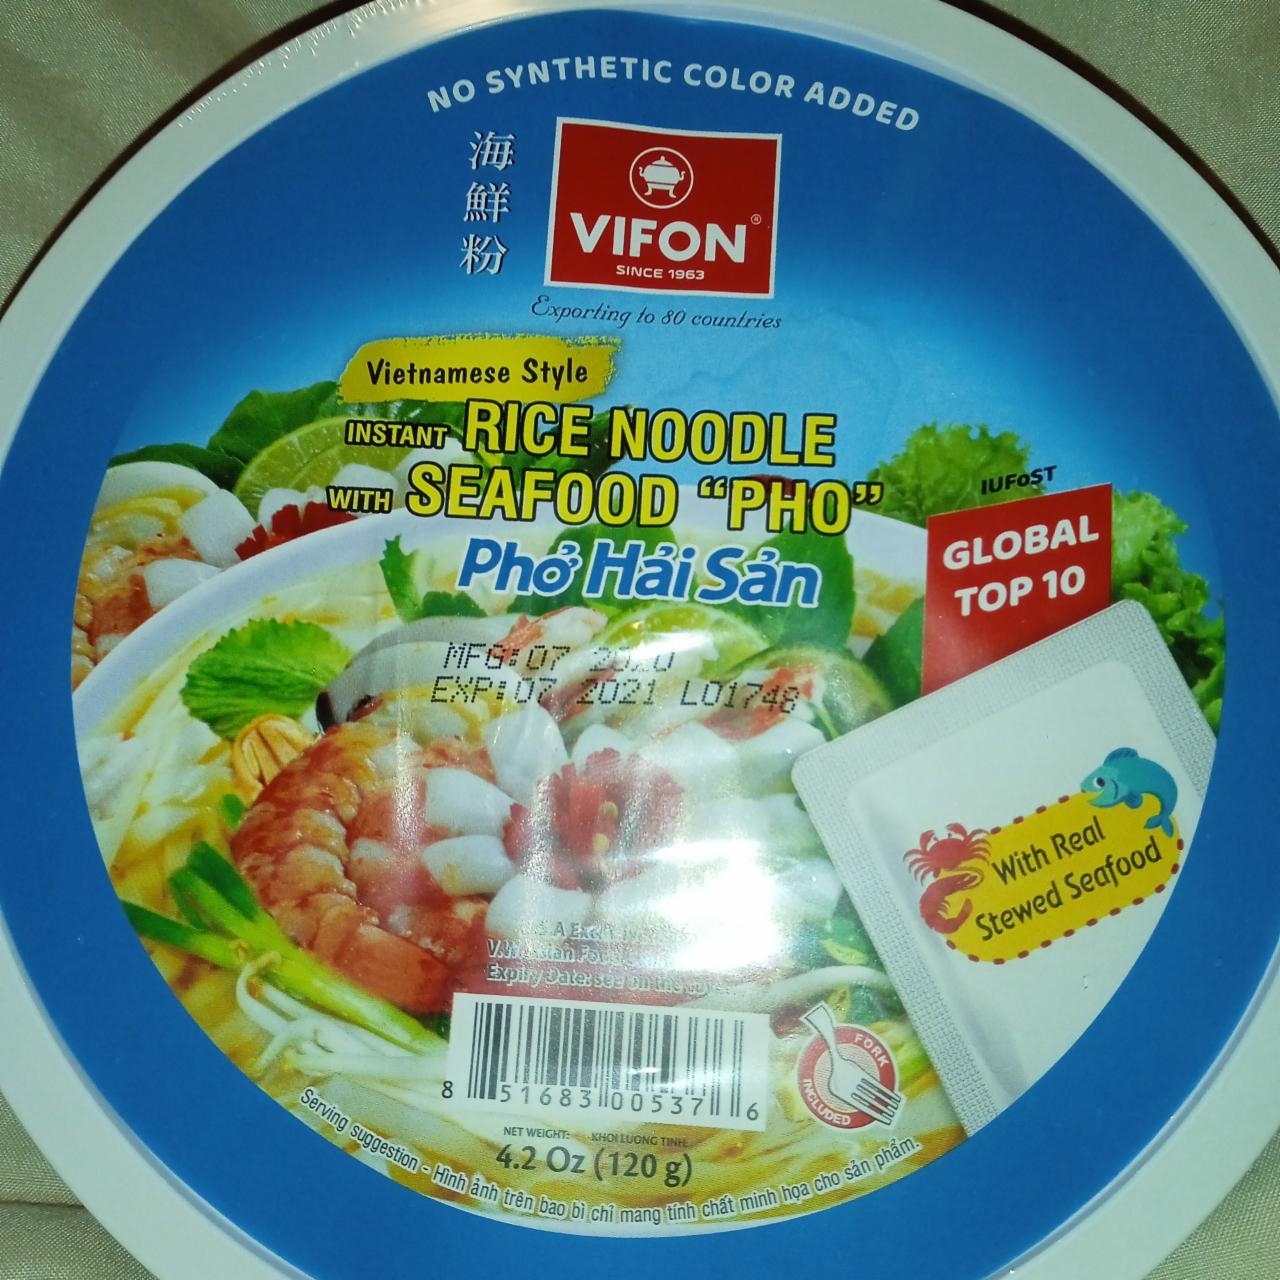 Fotografie - Vietnamese Style Instant rice noodle with seafood pho Vifon